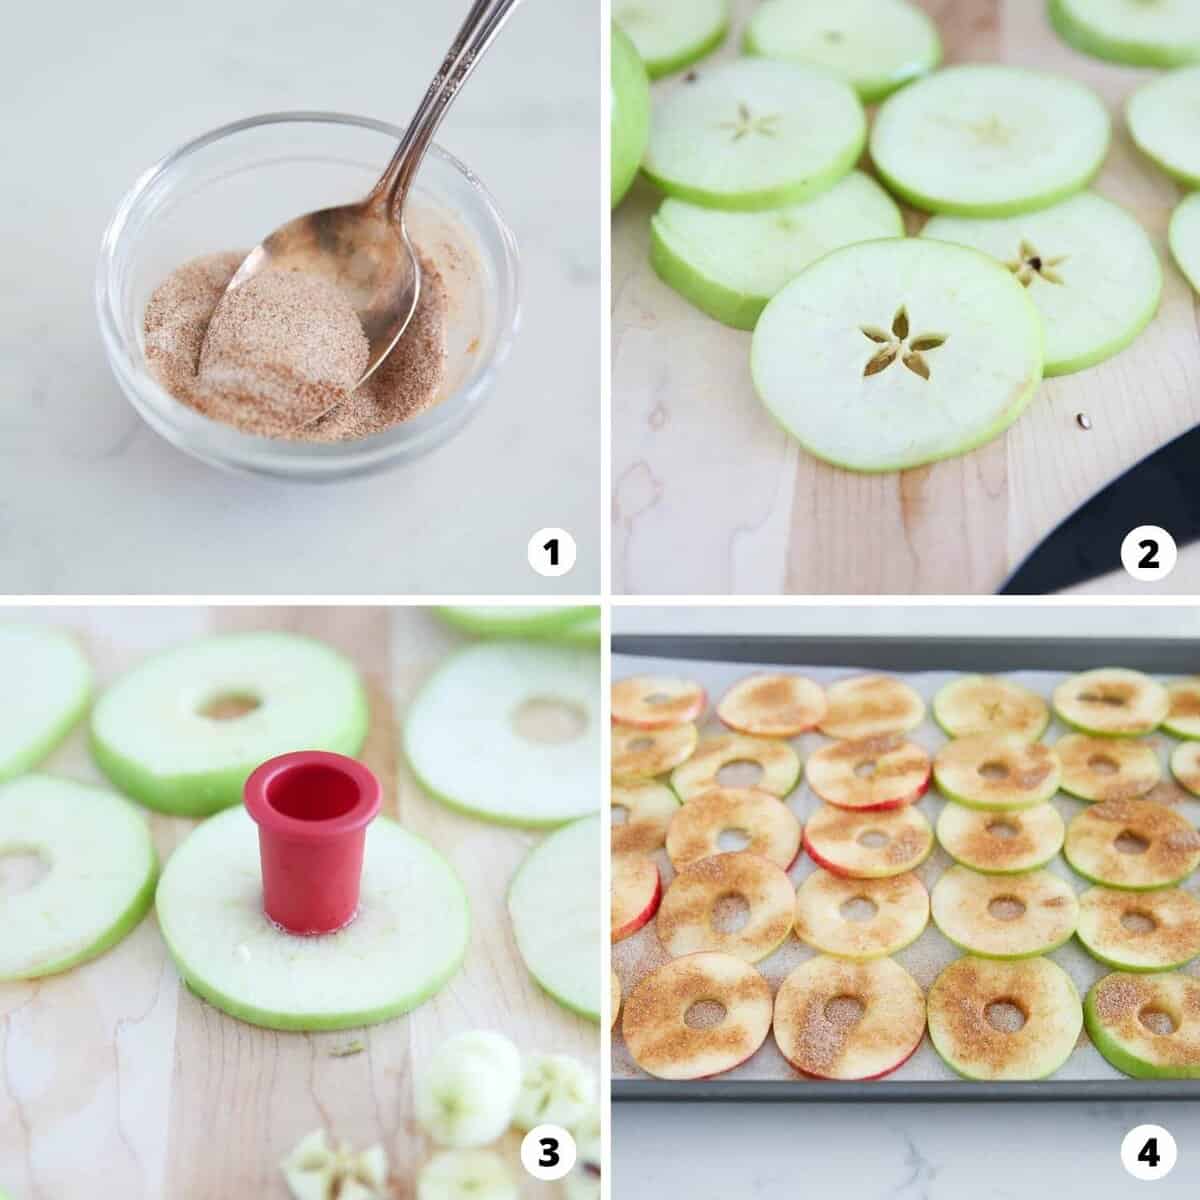 The process of making apple chips in a 4 step collage.